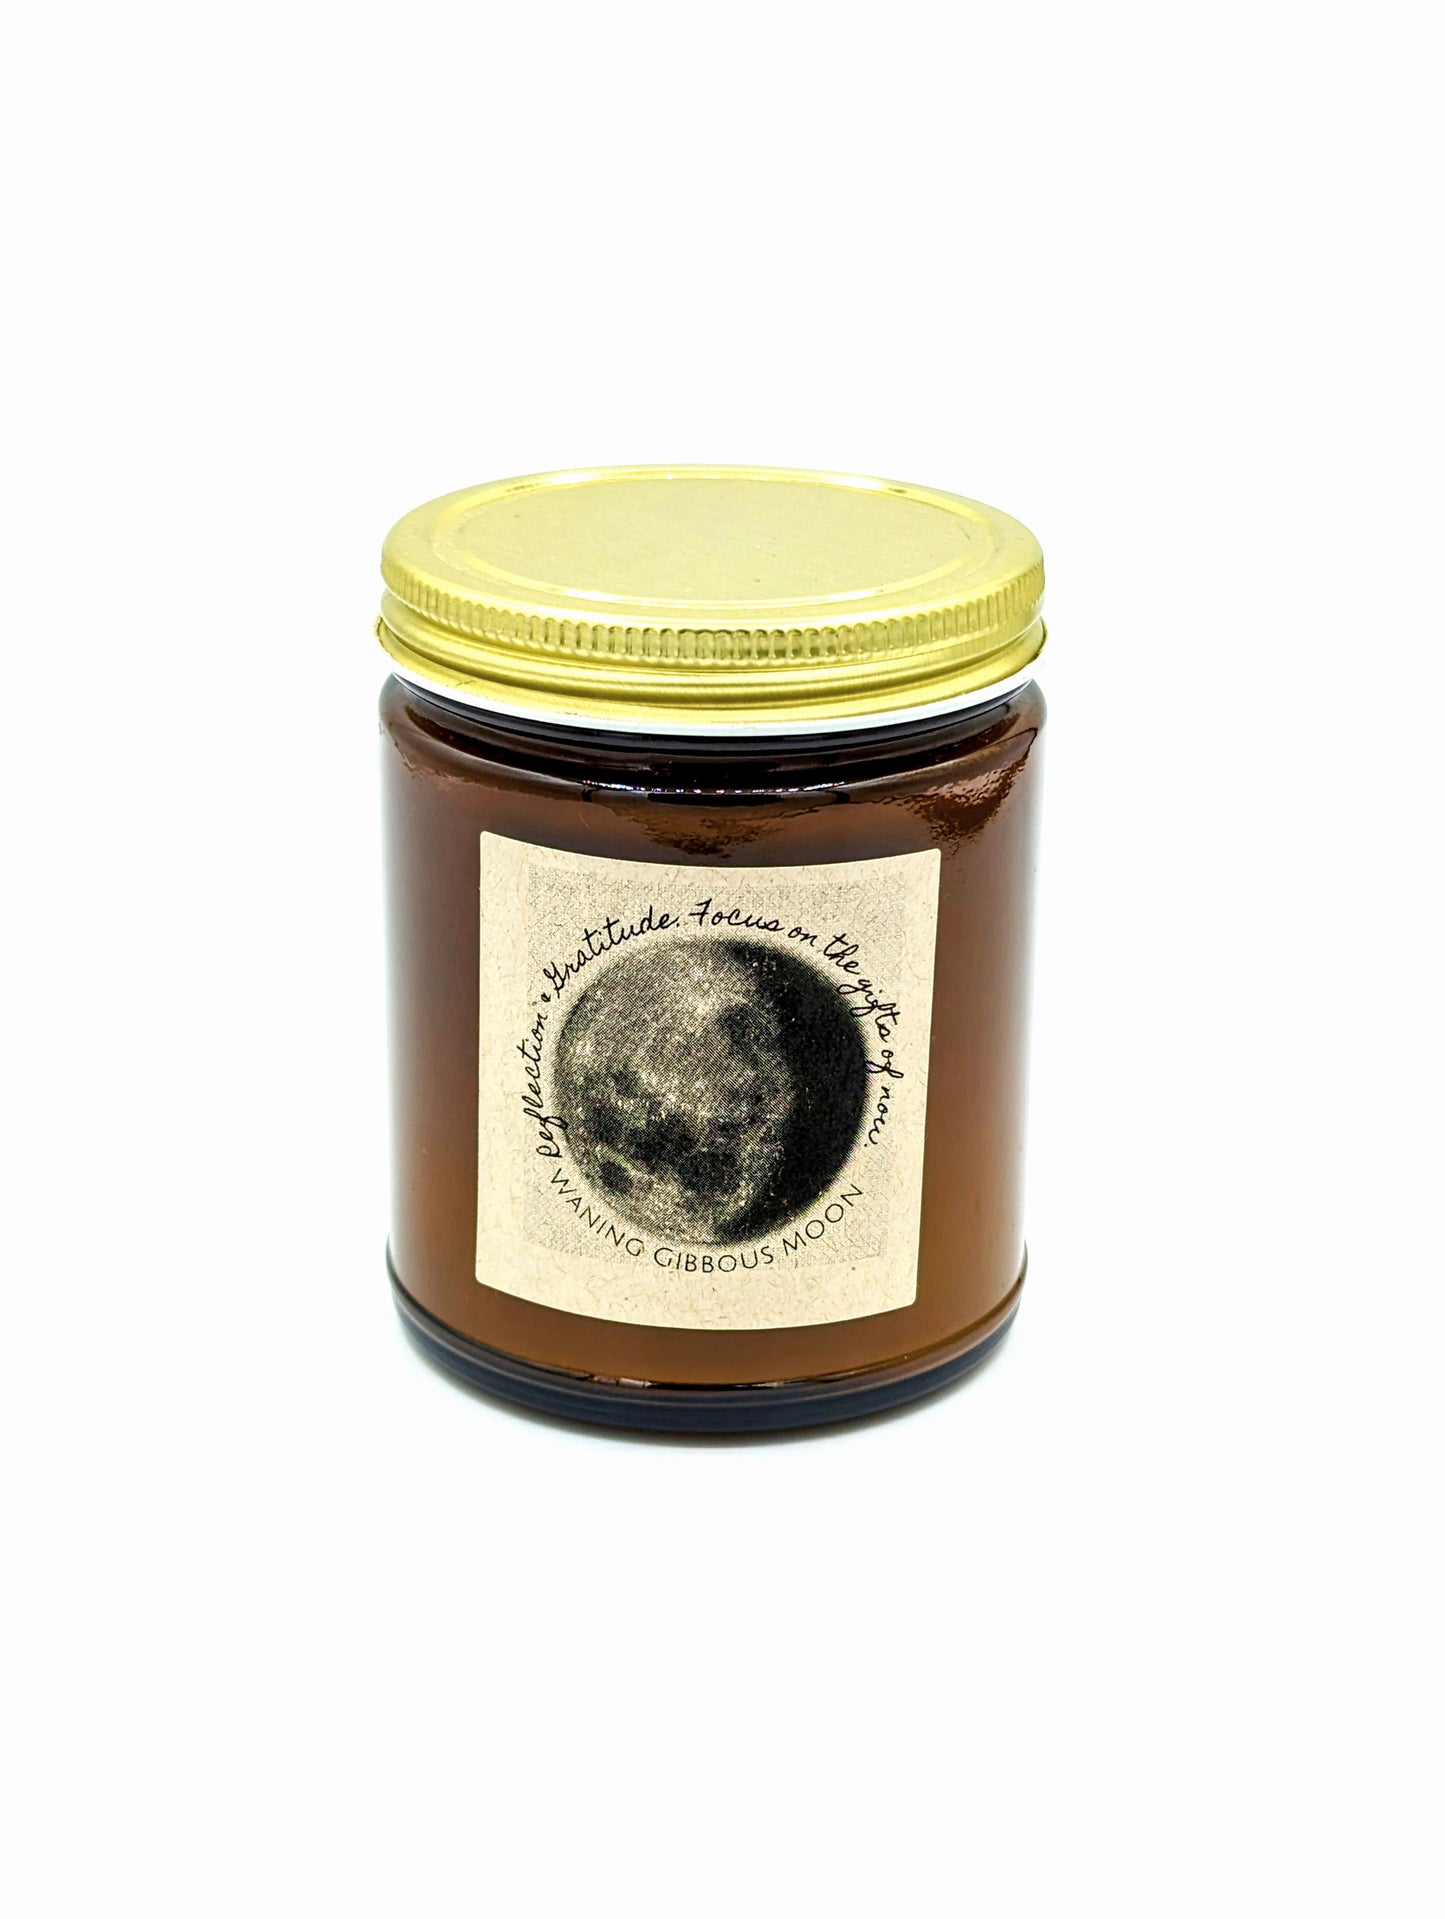 The Moon Phase Candle Series